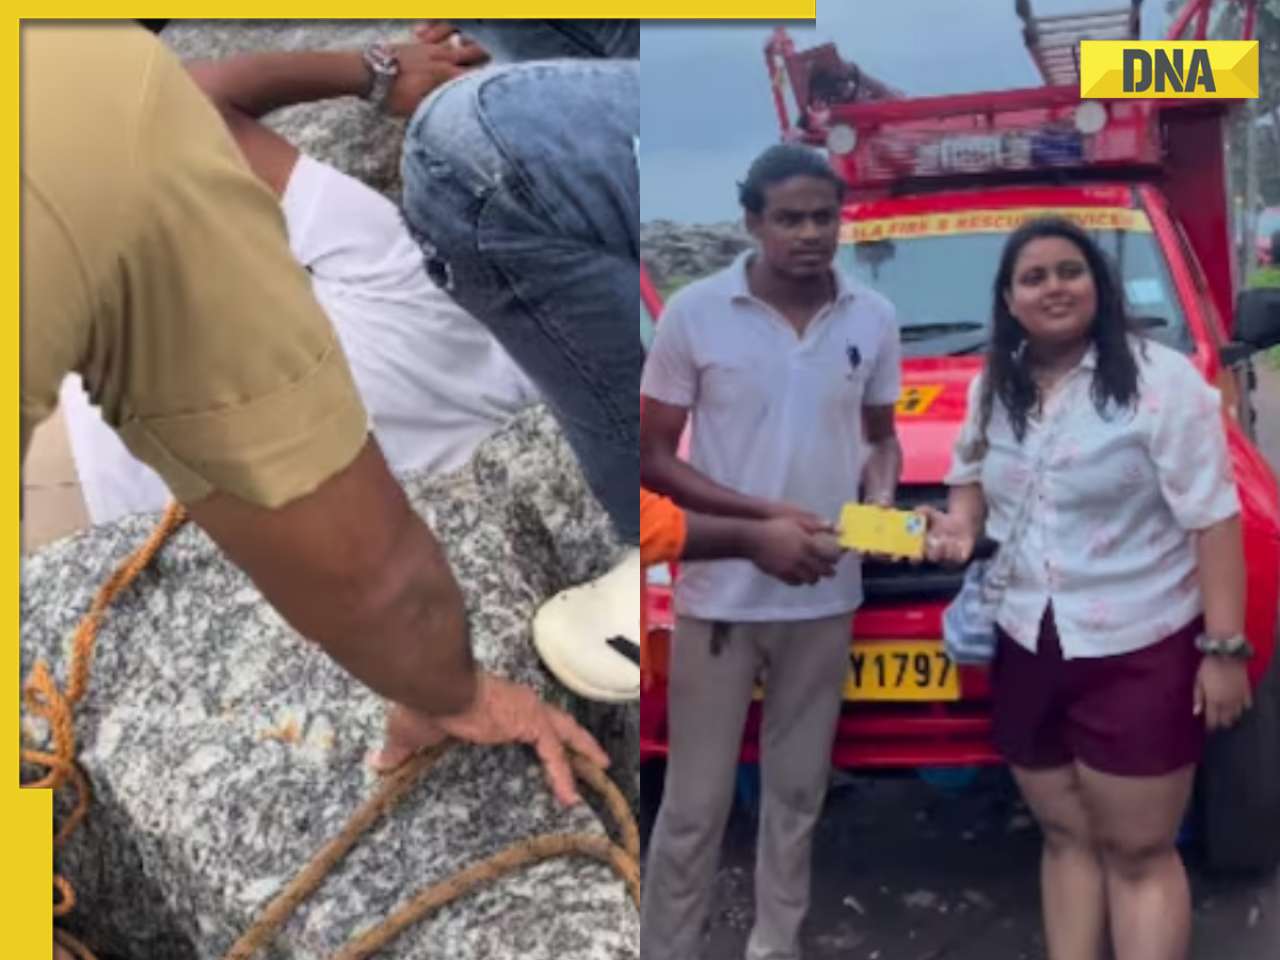 Woman's lost iPhone found after 7-hour search in Kerala; viral video captures dramatic recovery